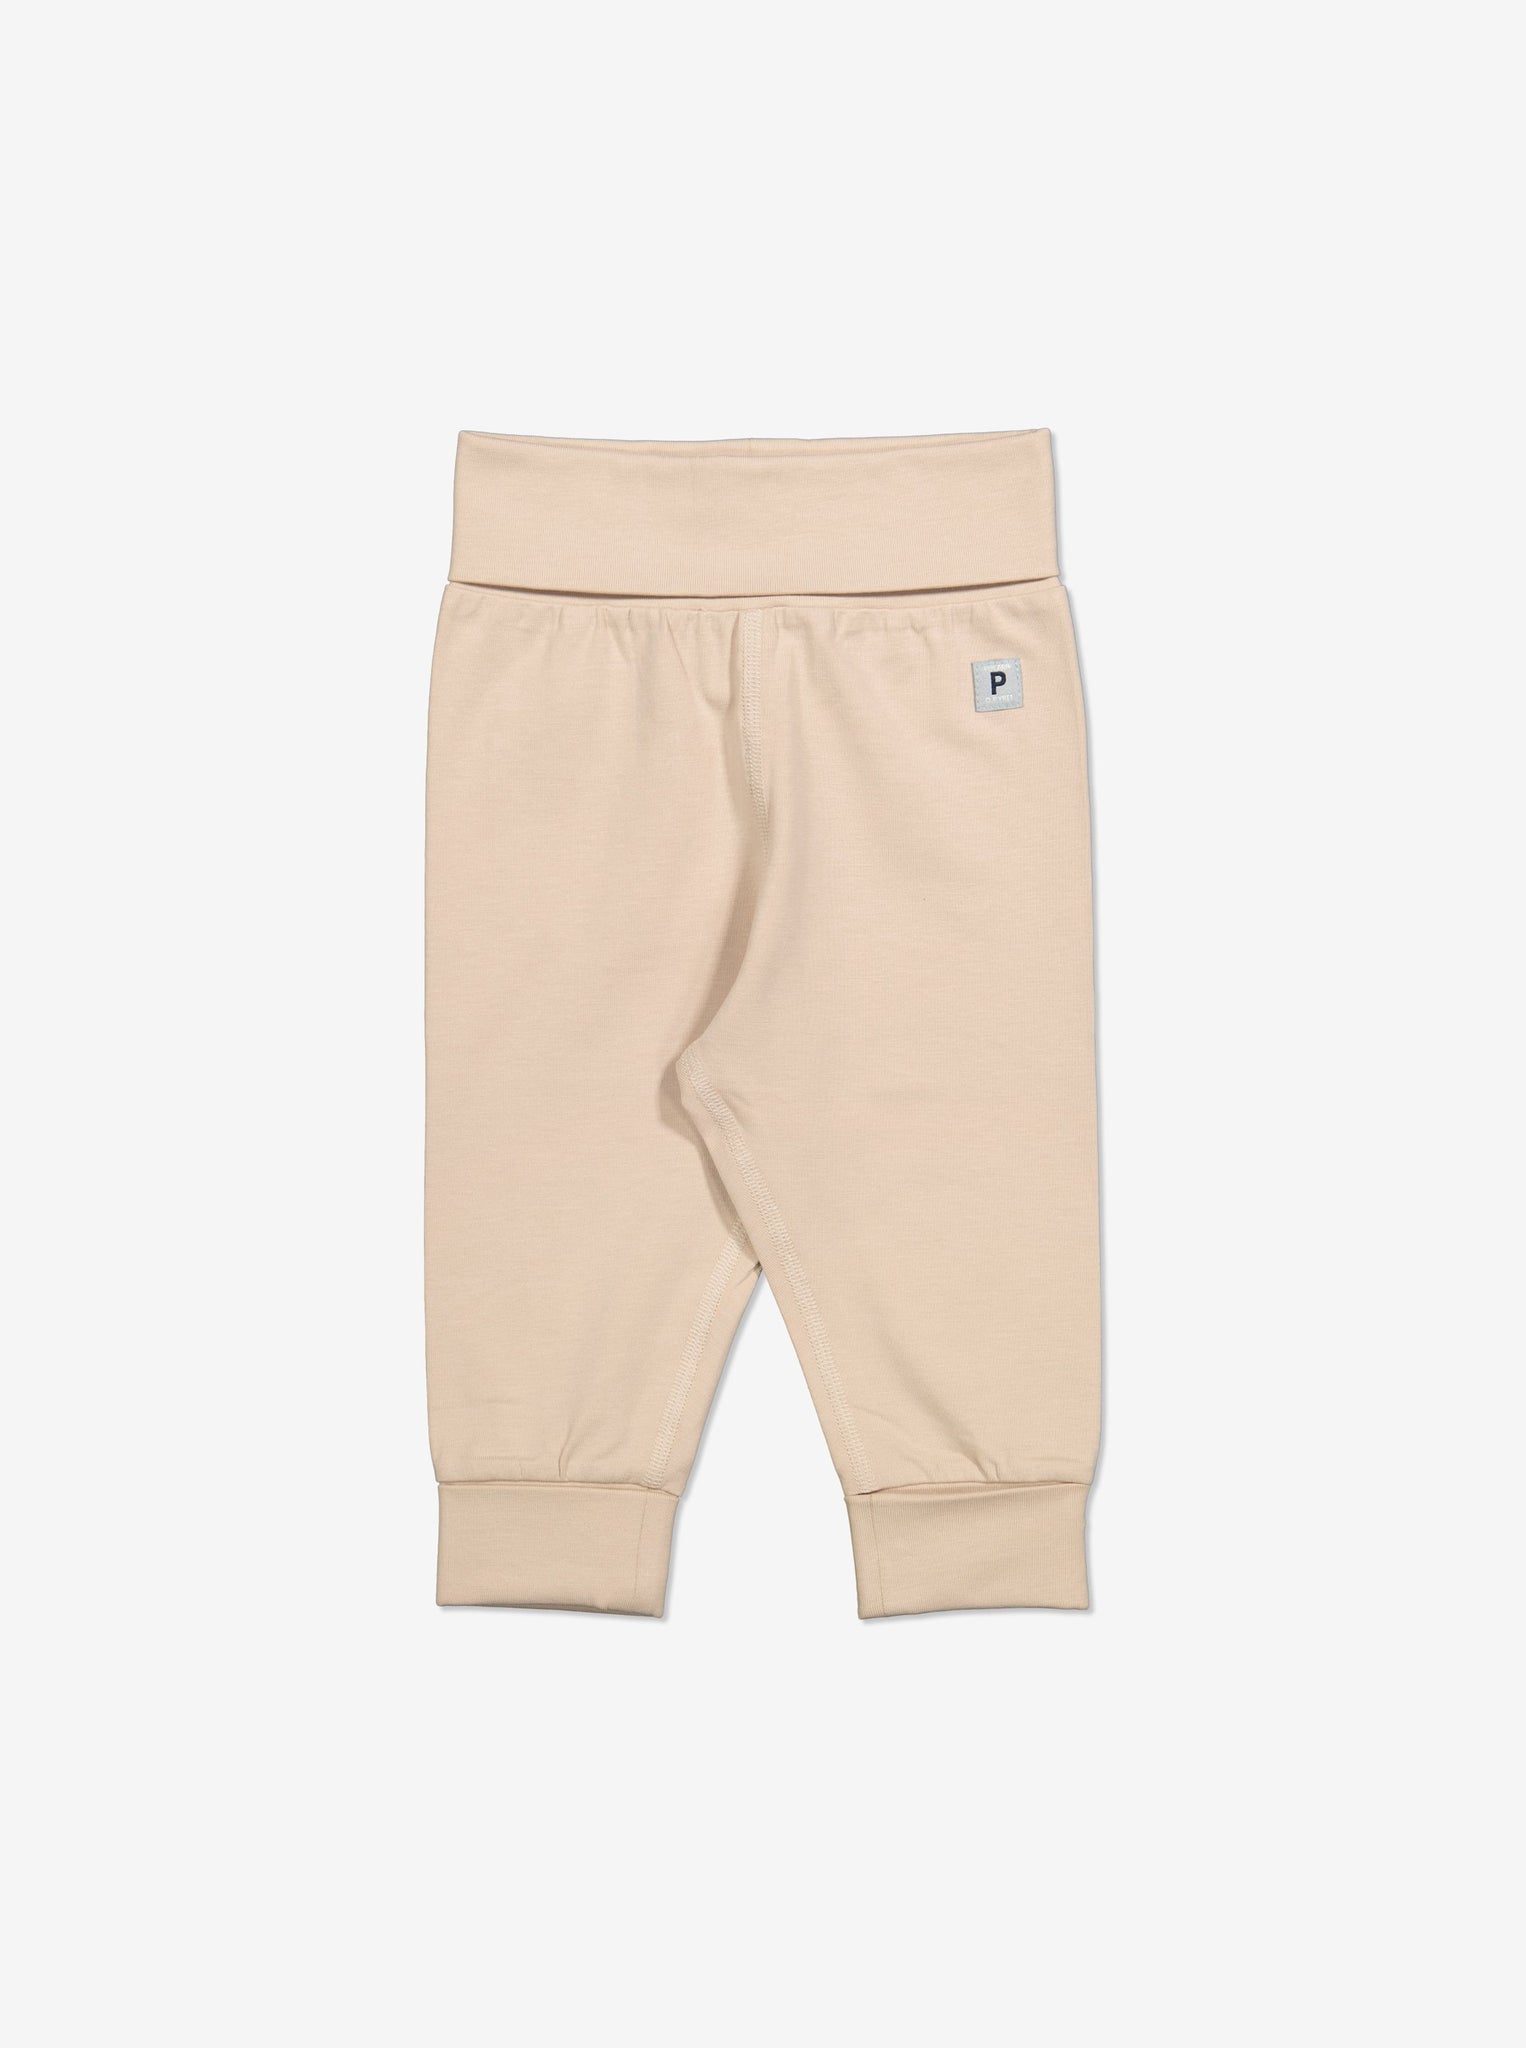  Organic Beige Baby Leggings from Polarn O. Pyret Kidswear. Made from ethically sourced materials.